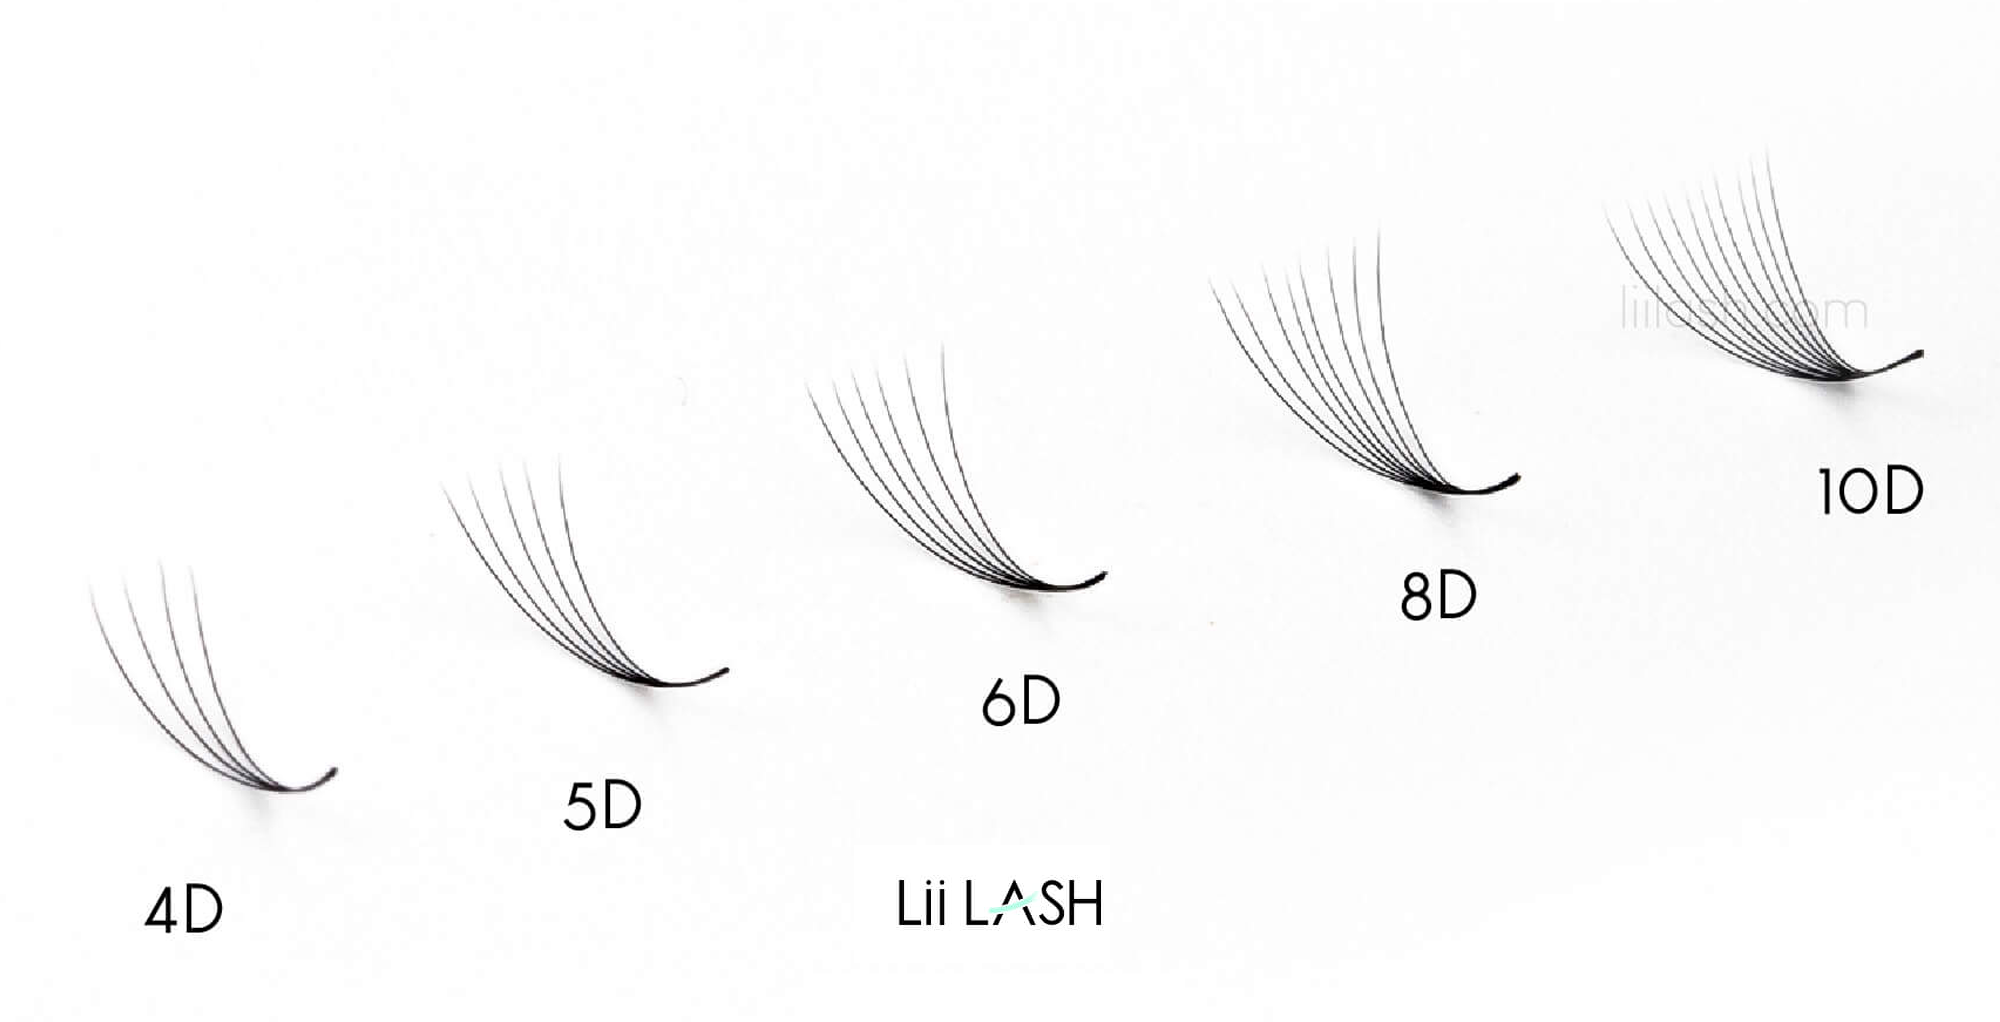 A visual depiction displaying various dimensions of volume premade fan eyelash extensions, varying from 4D to 8D, offering options for customized lash styles and volume